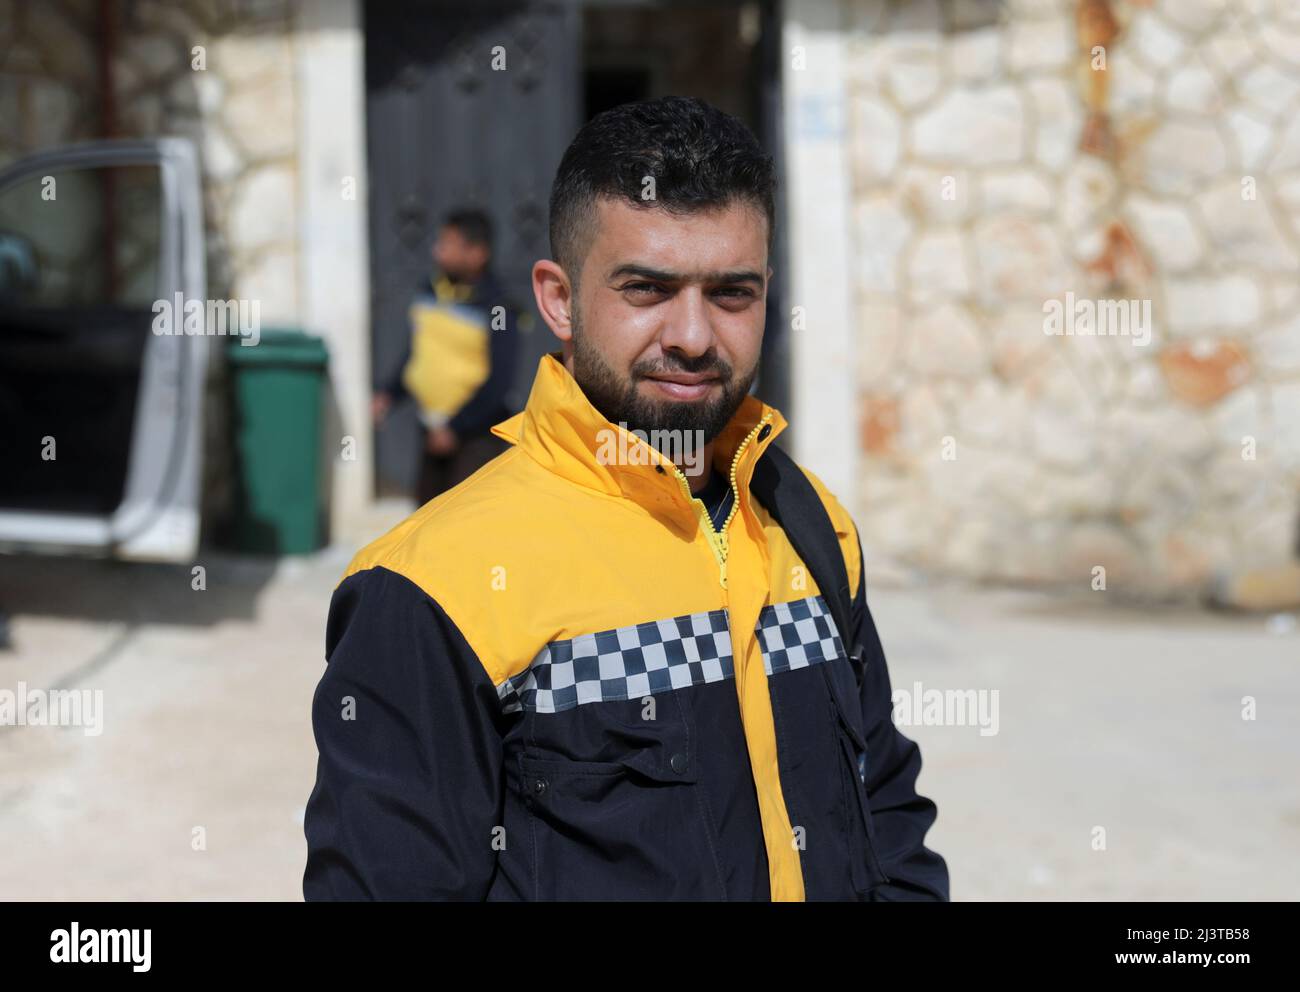 Hamid Ketteny, a civil defence rescue worker who says he carried to a nearby medical point the bodies of six children who were killed when poison gas was dropped in the town of Khan Sheikhoun in 2017, poses as he stands outside a civil defence center on the outskirts of the rebel-held Idlib, Syria April 2, 2022. Picture taken April 2, 2022. REUTERS/Khalil Ashawi Stock Photo